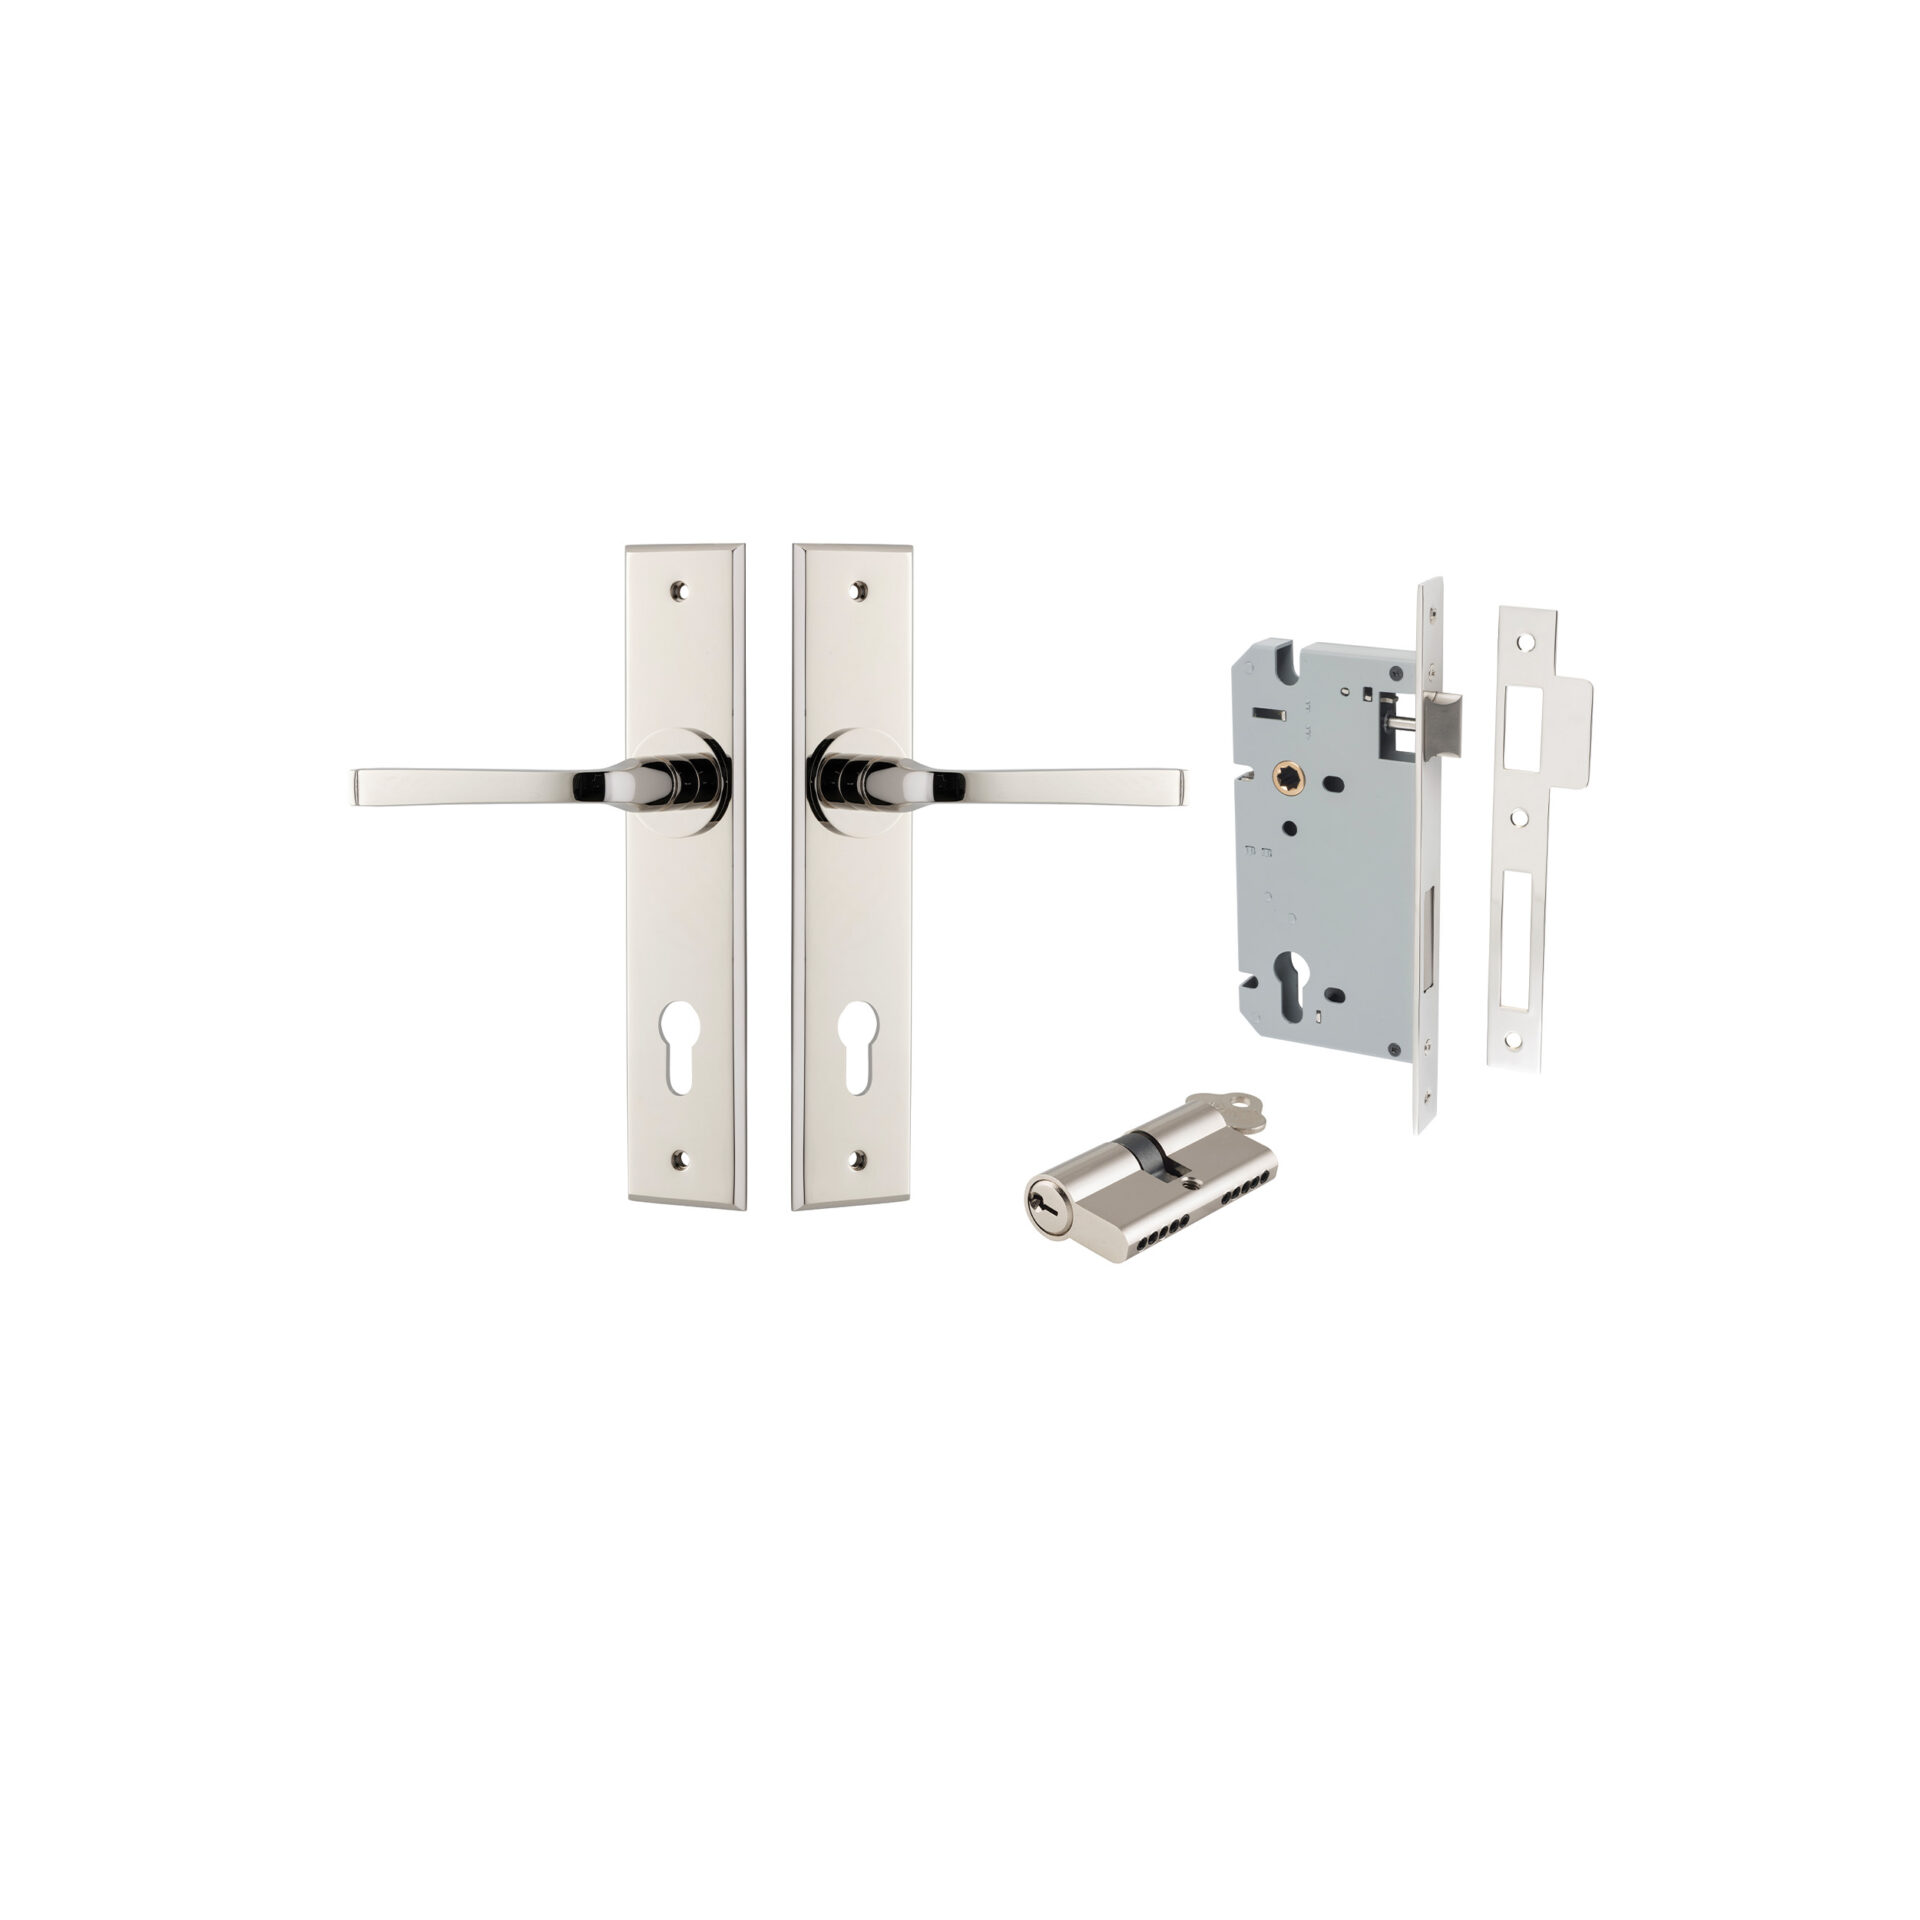 14288KENTR60KK - Annecy Lever - Chamfered Backplate Entrance Kit with High Security Lock - Polished Nickel - Entrance